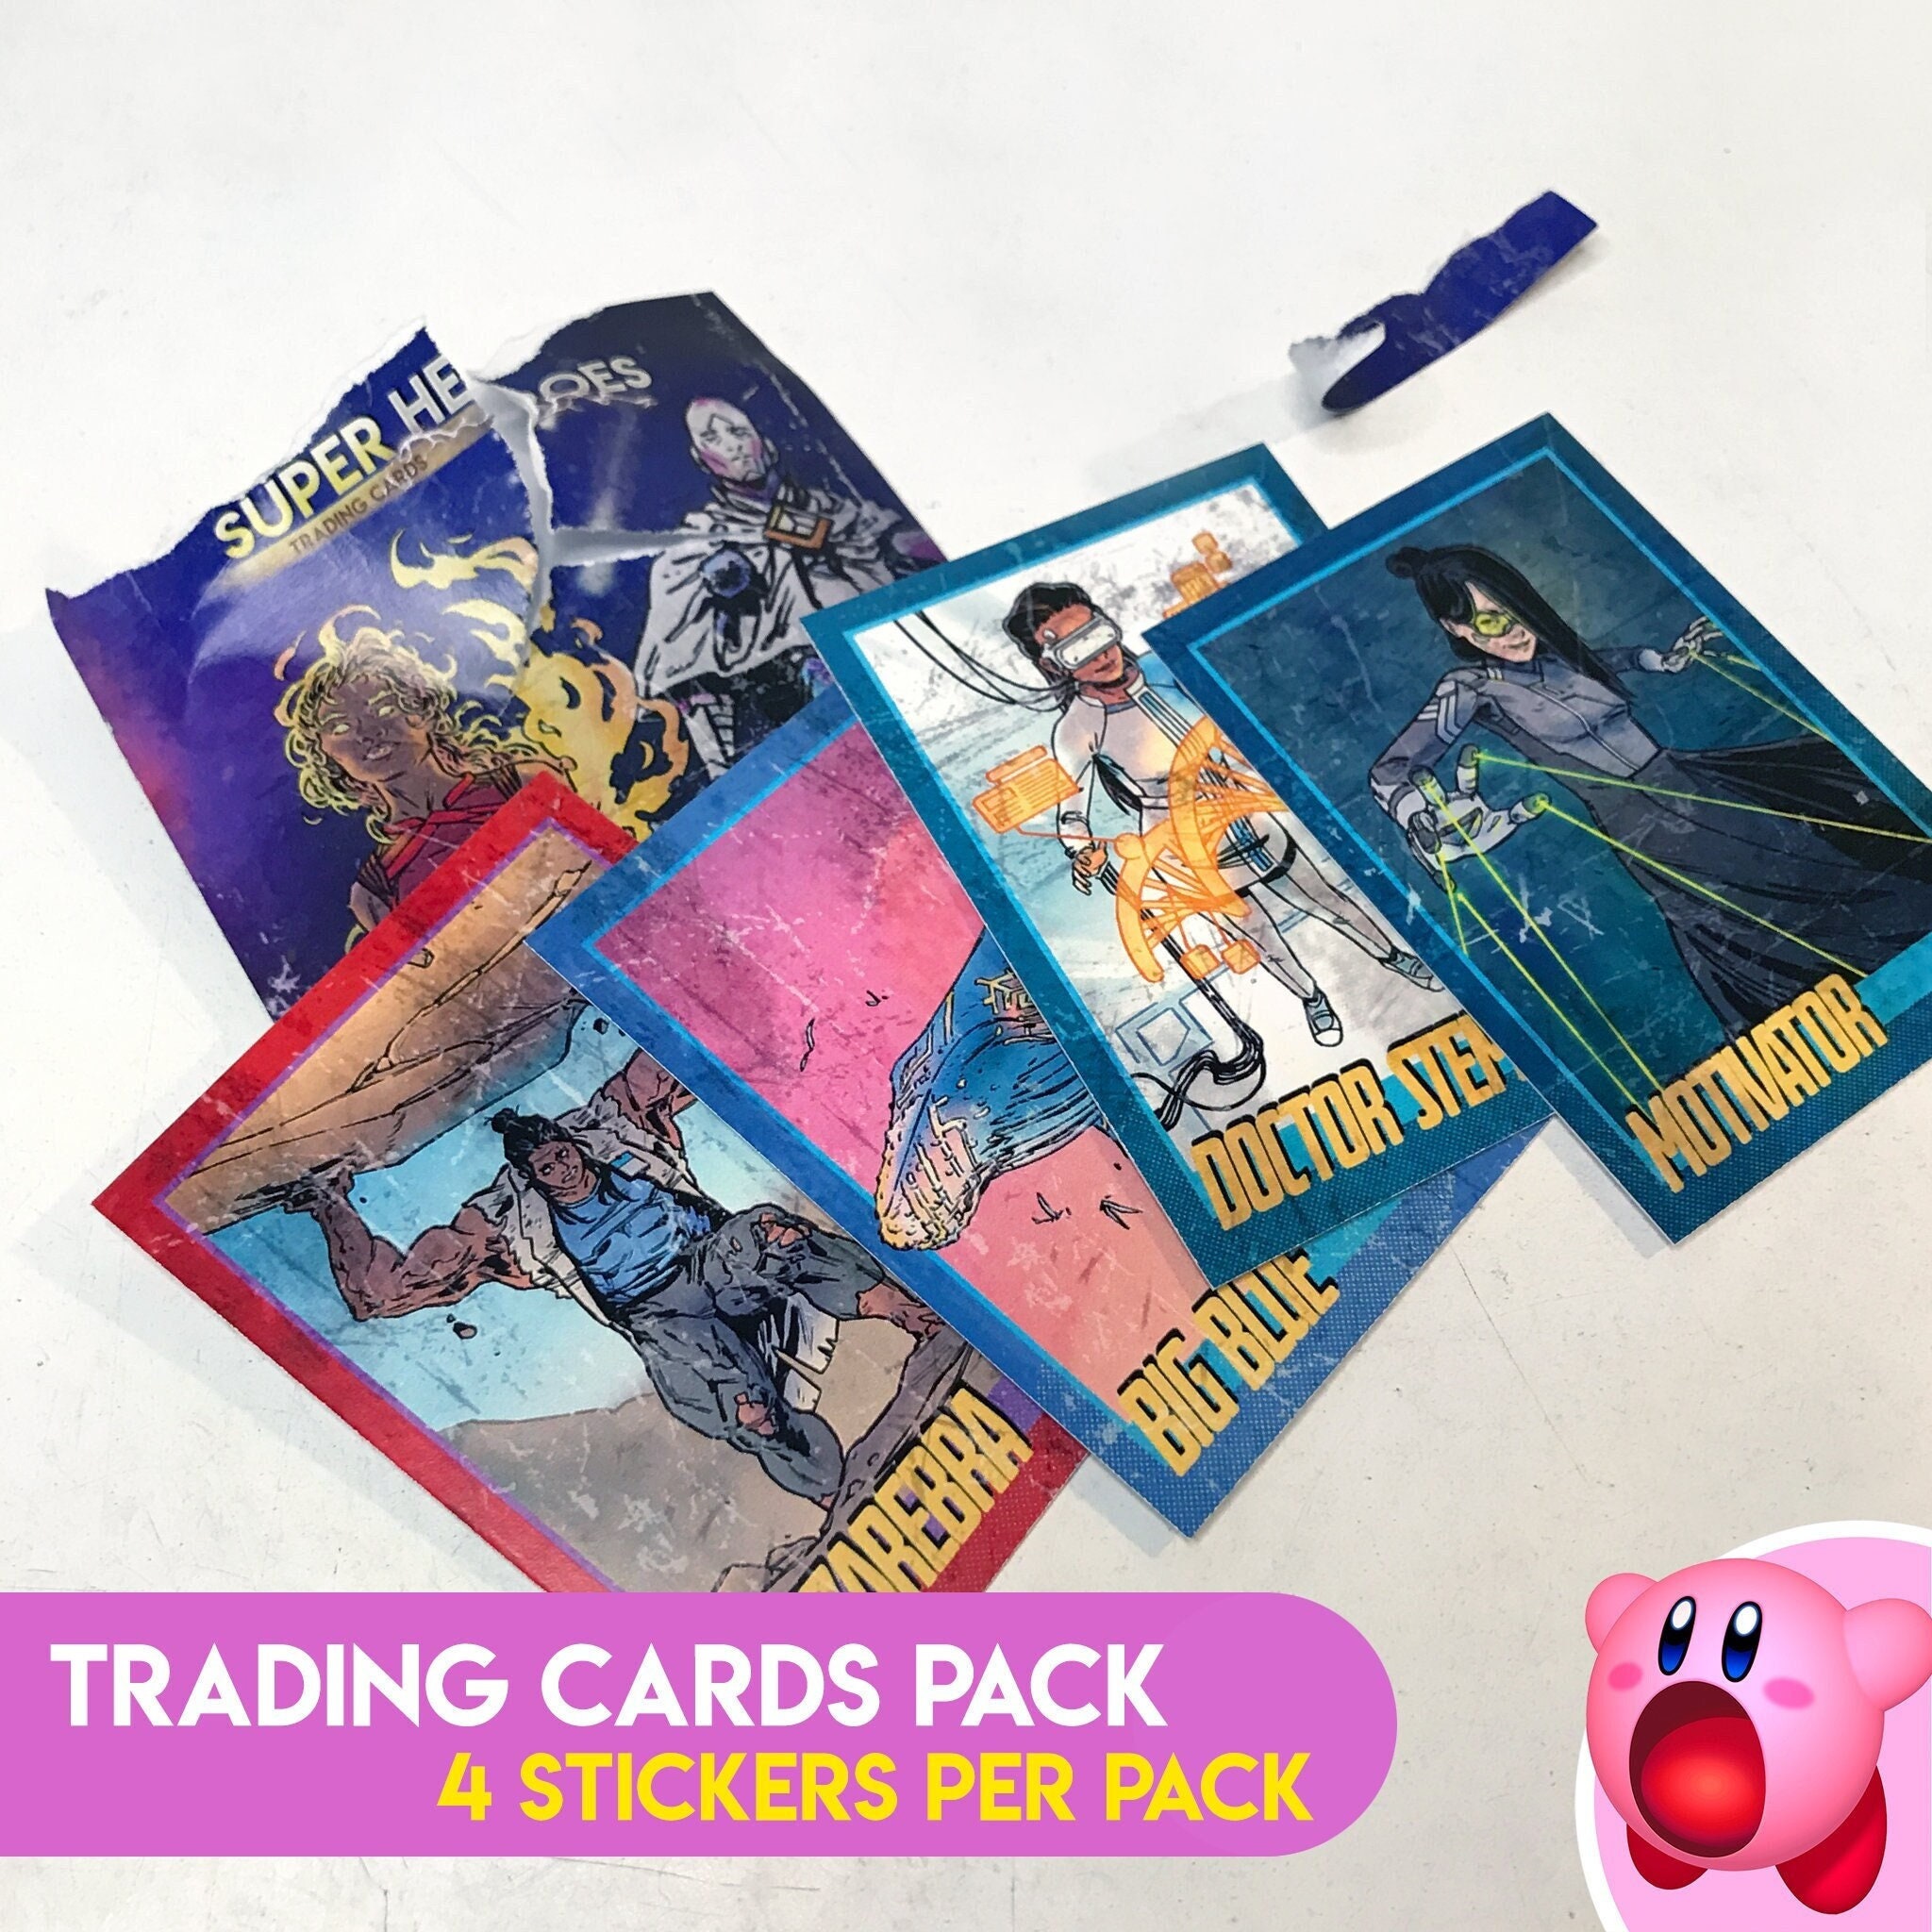 TRADING CARDS Pack X1 the Last of Us Part 2 image